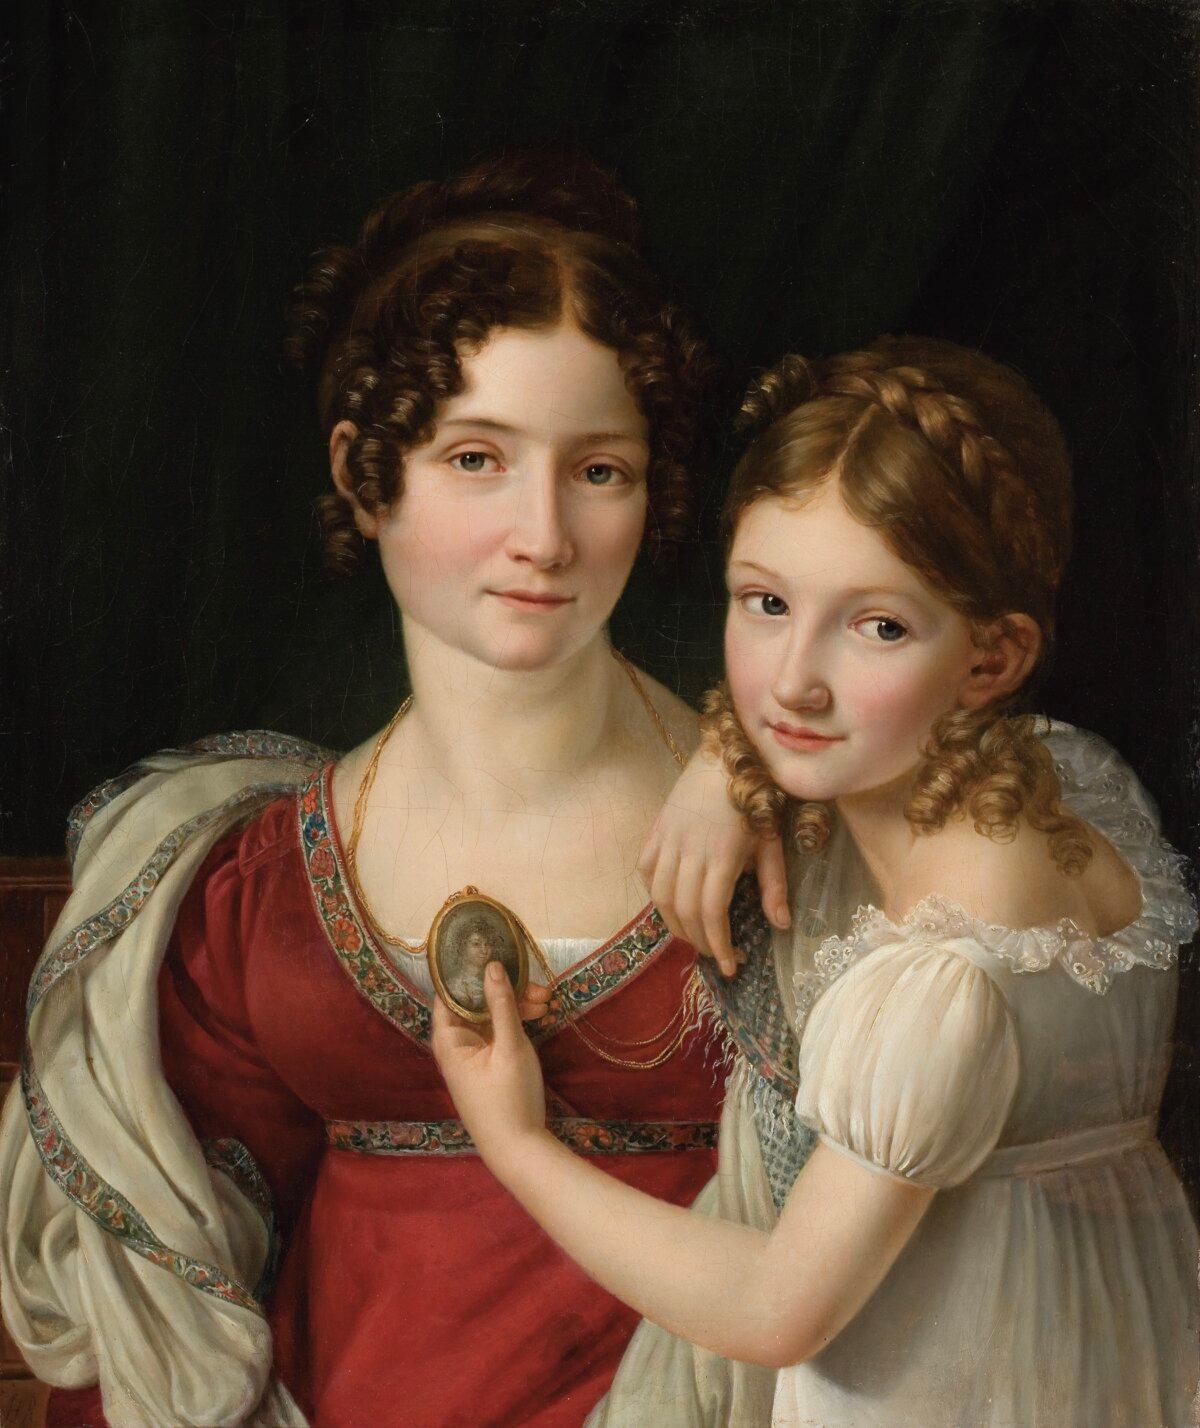 “Portrait of a Mother With Her Daughter” by Henri-François Riesener, 1816−1823. Oil on canvas. Finnish National Gallery. (Public Domain)